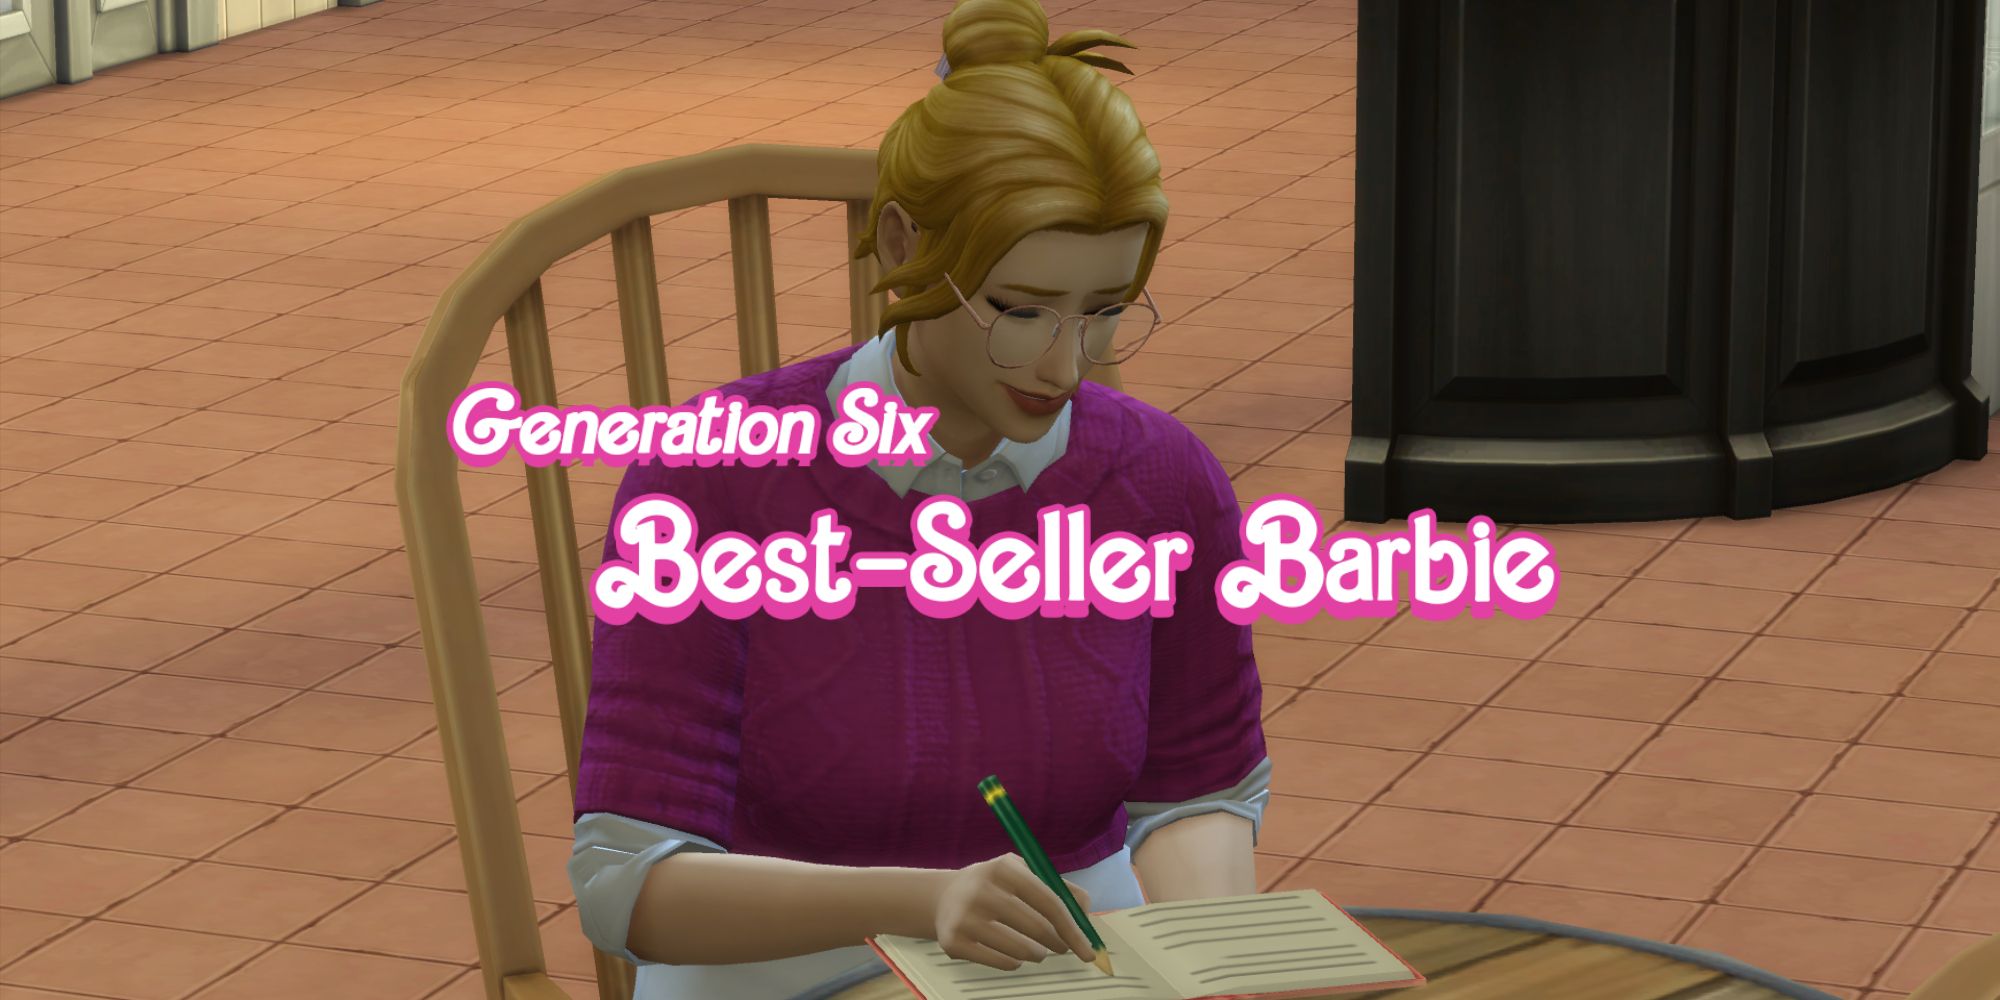 Best-Seller Barbie sets her sights on writing a best-selling novel as her objective for the Barbie Legacy Challenge (The Sims 4).